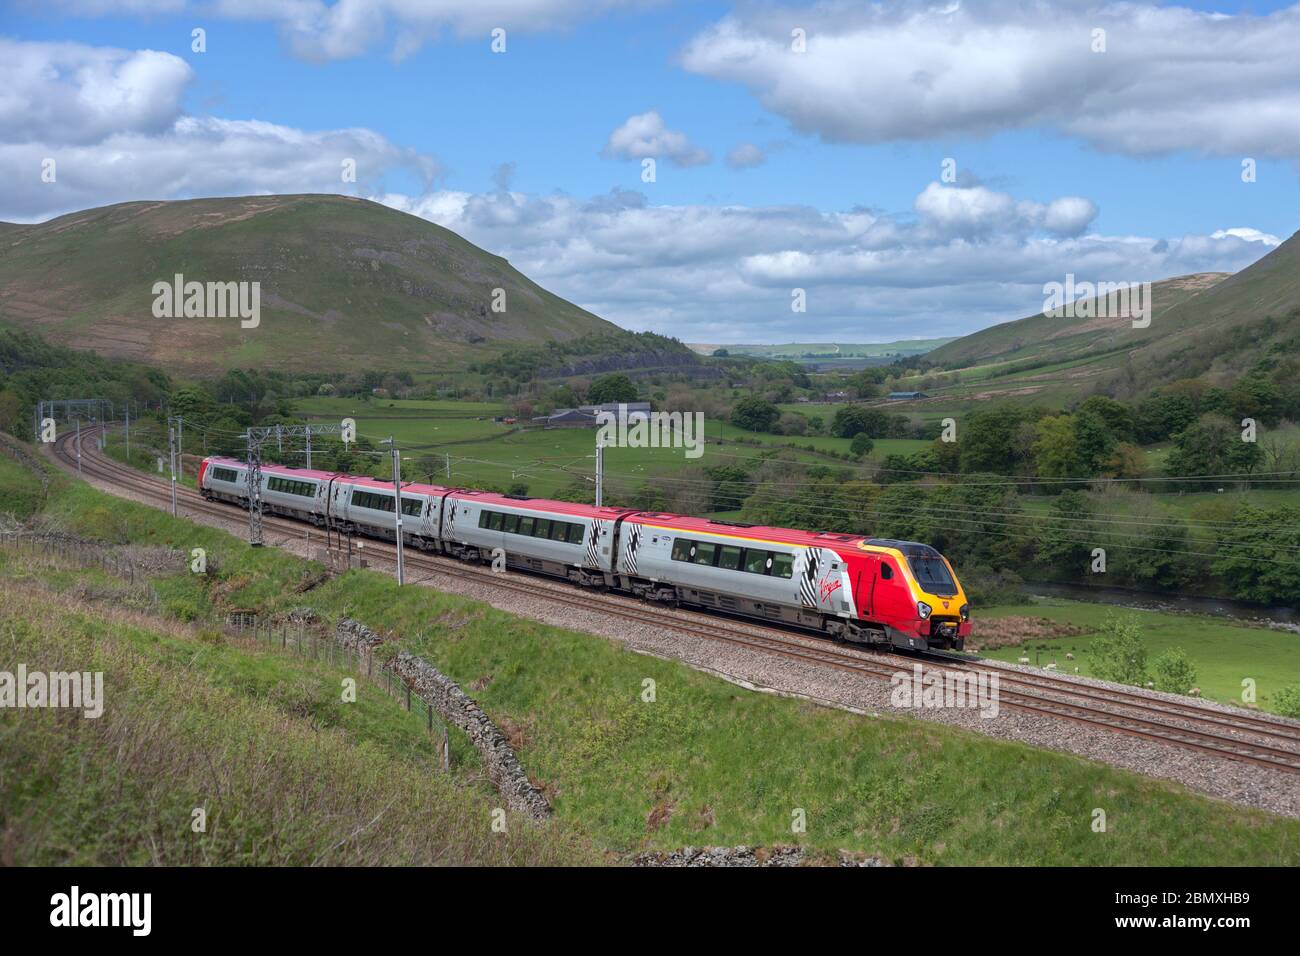 Virgin Trains class 221 Bombardier voyager train 221112 in the countryside on the west coast mainline in the lune gorge in Cumbria Stock Photo